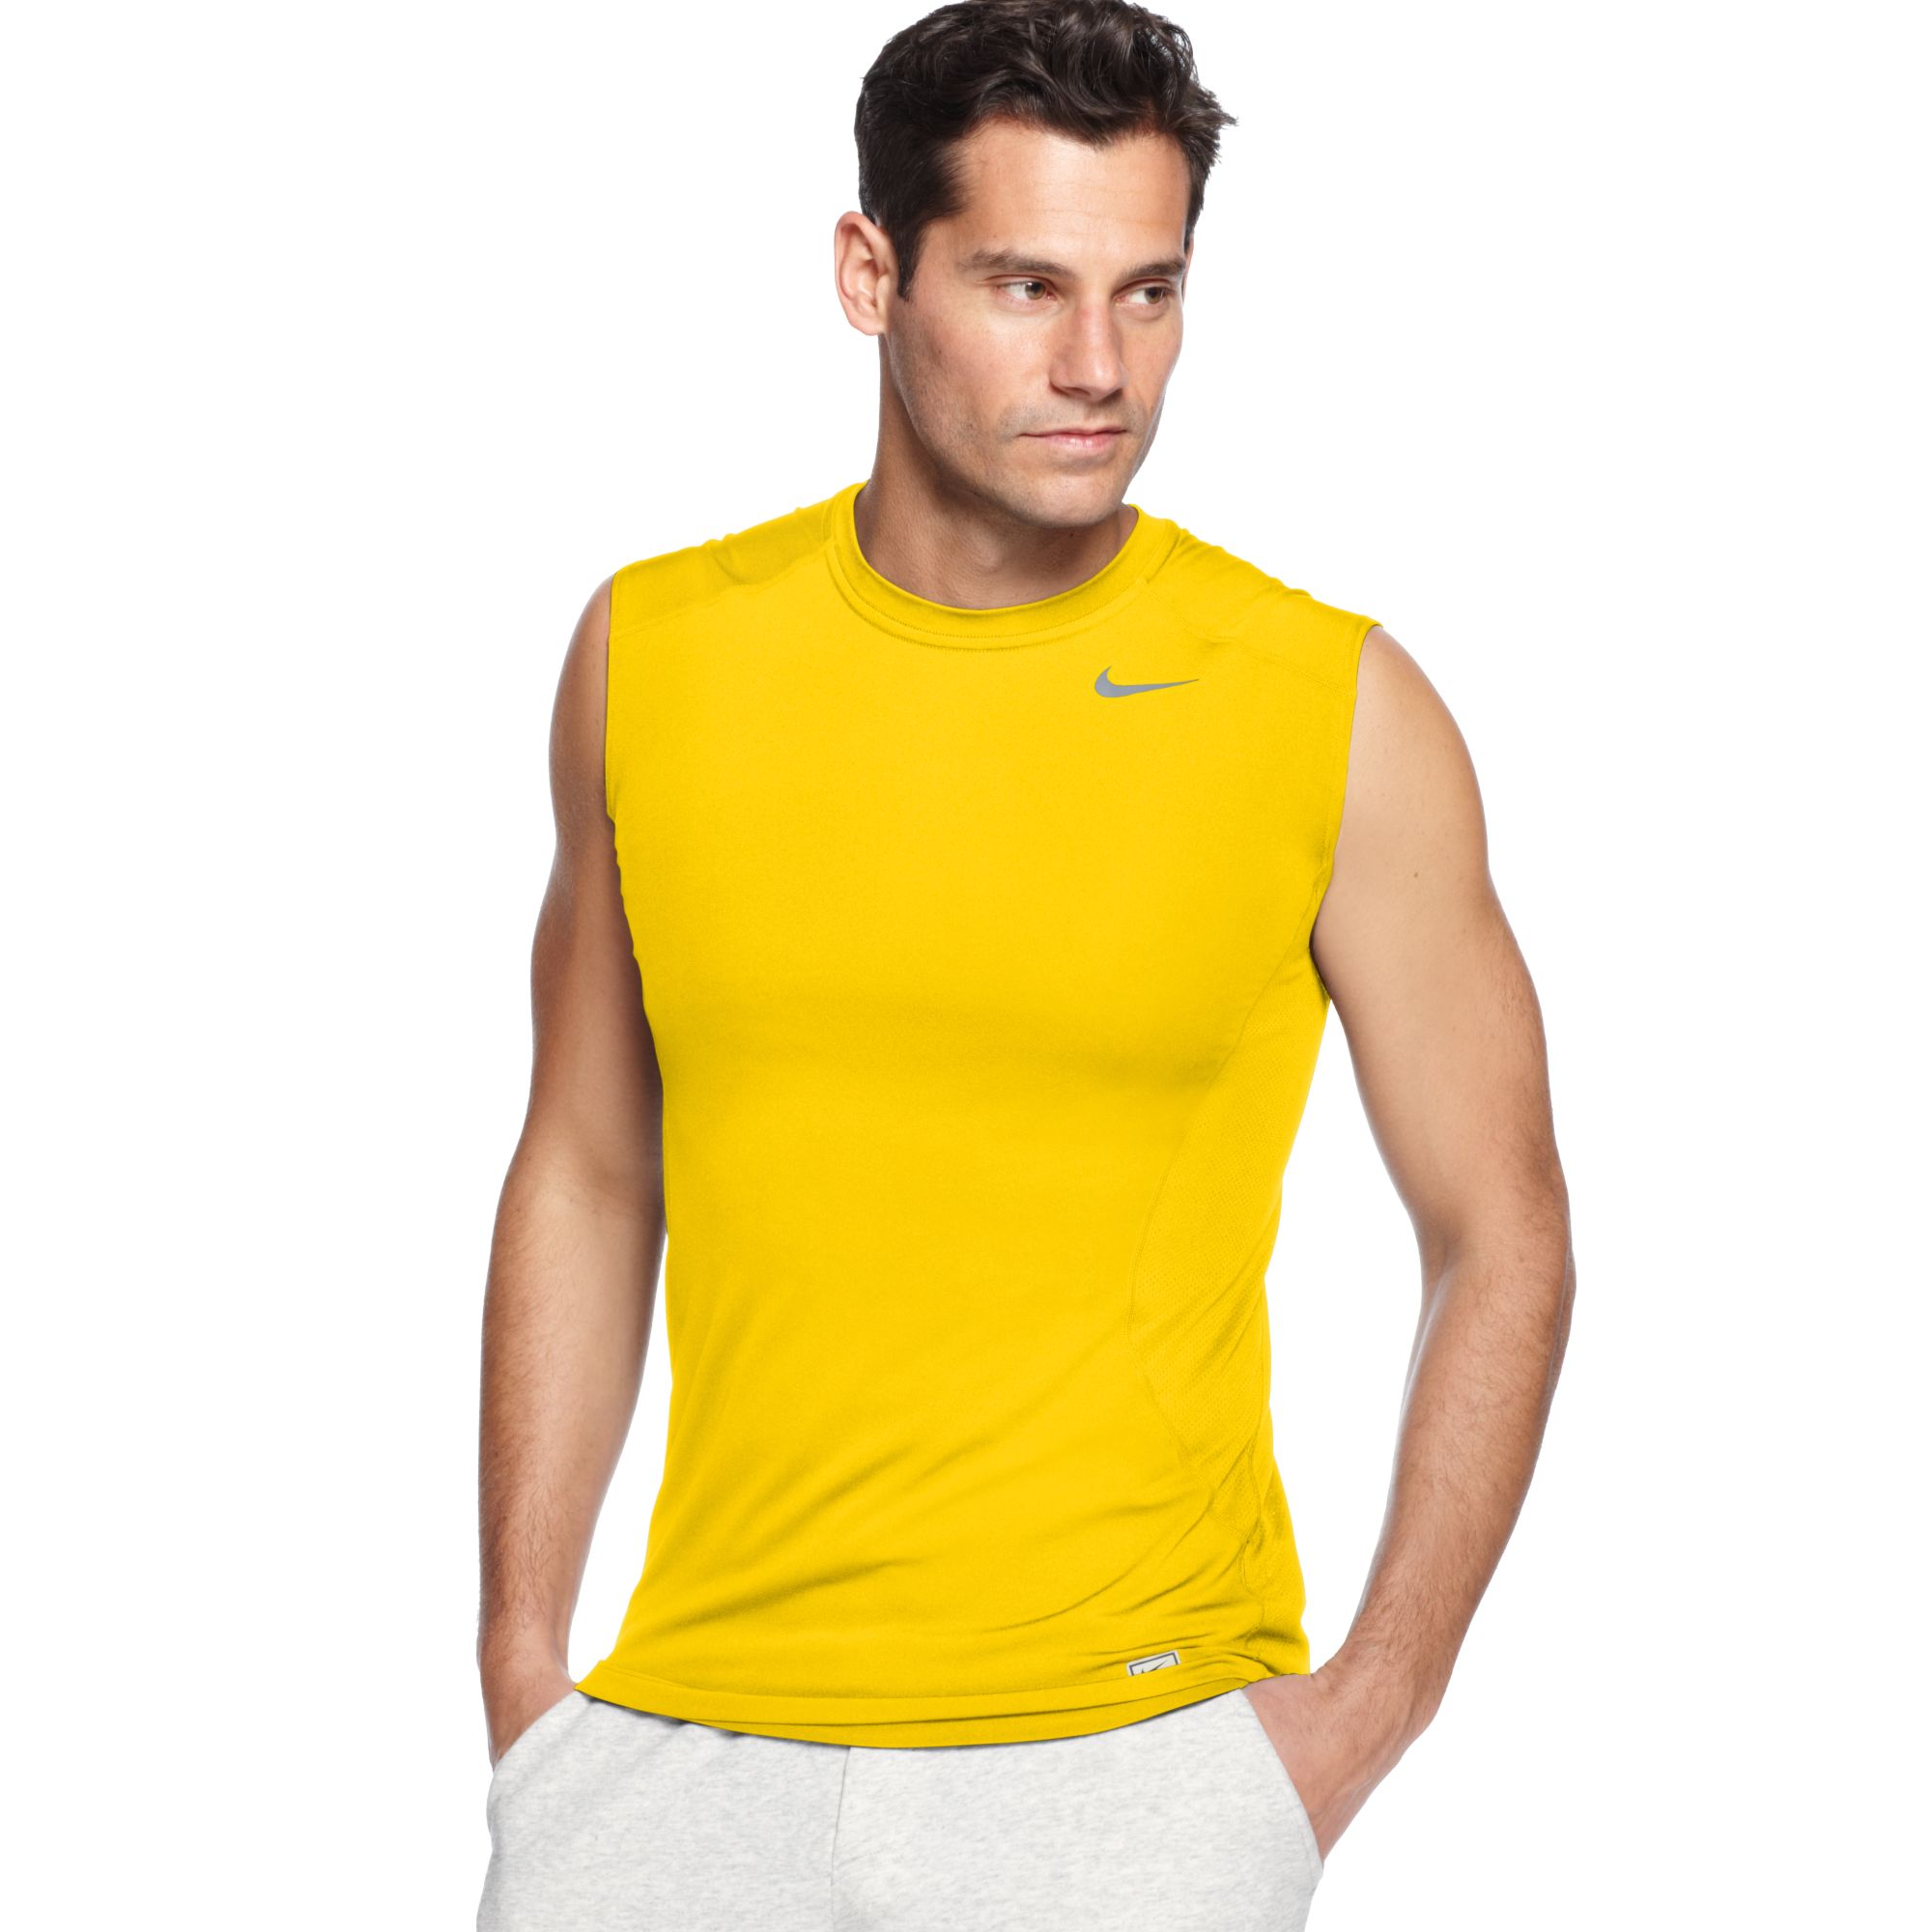 Nike Procombat Drifit Fitted Sleeveless Tee in Yellow for Men - Lyst